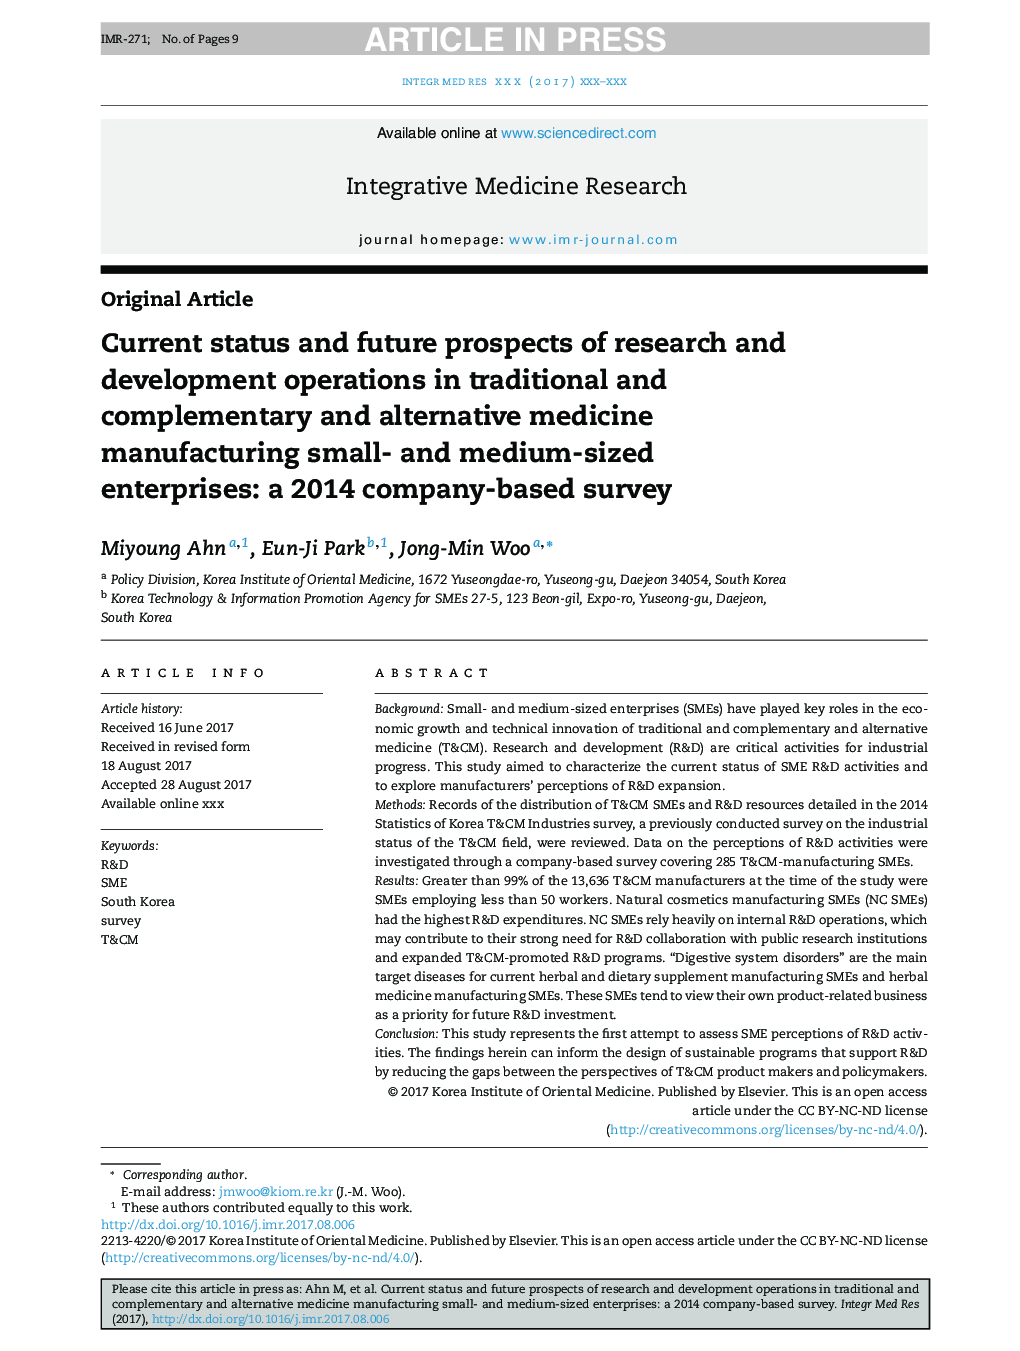 Current status and future prospects of research and development operations in traditional and complementary and alternative medicine manufacturing small- and medium-sized enterprises: a 2014 company-based survey